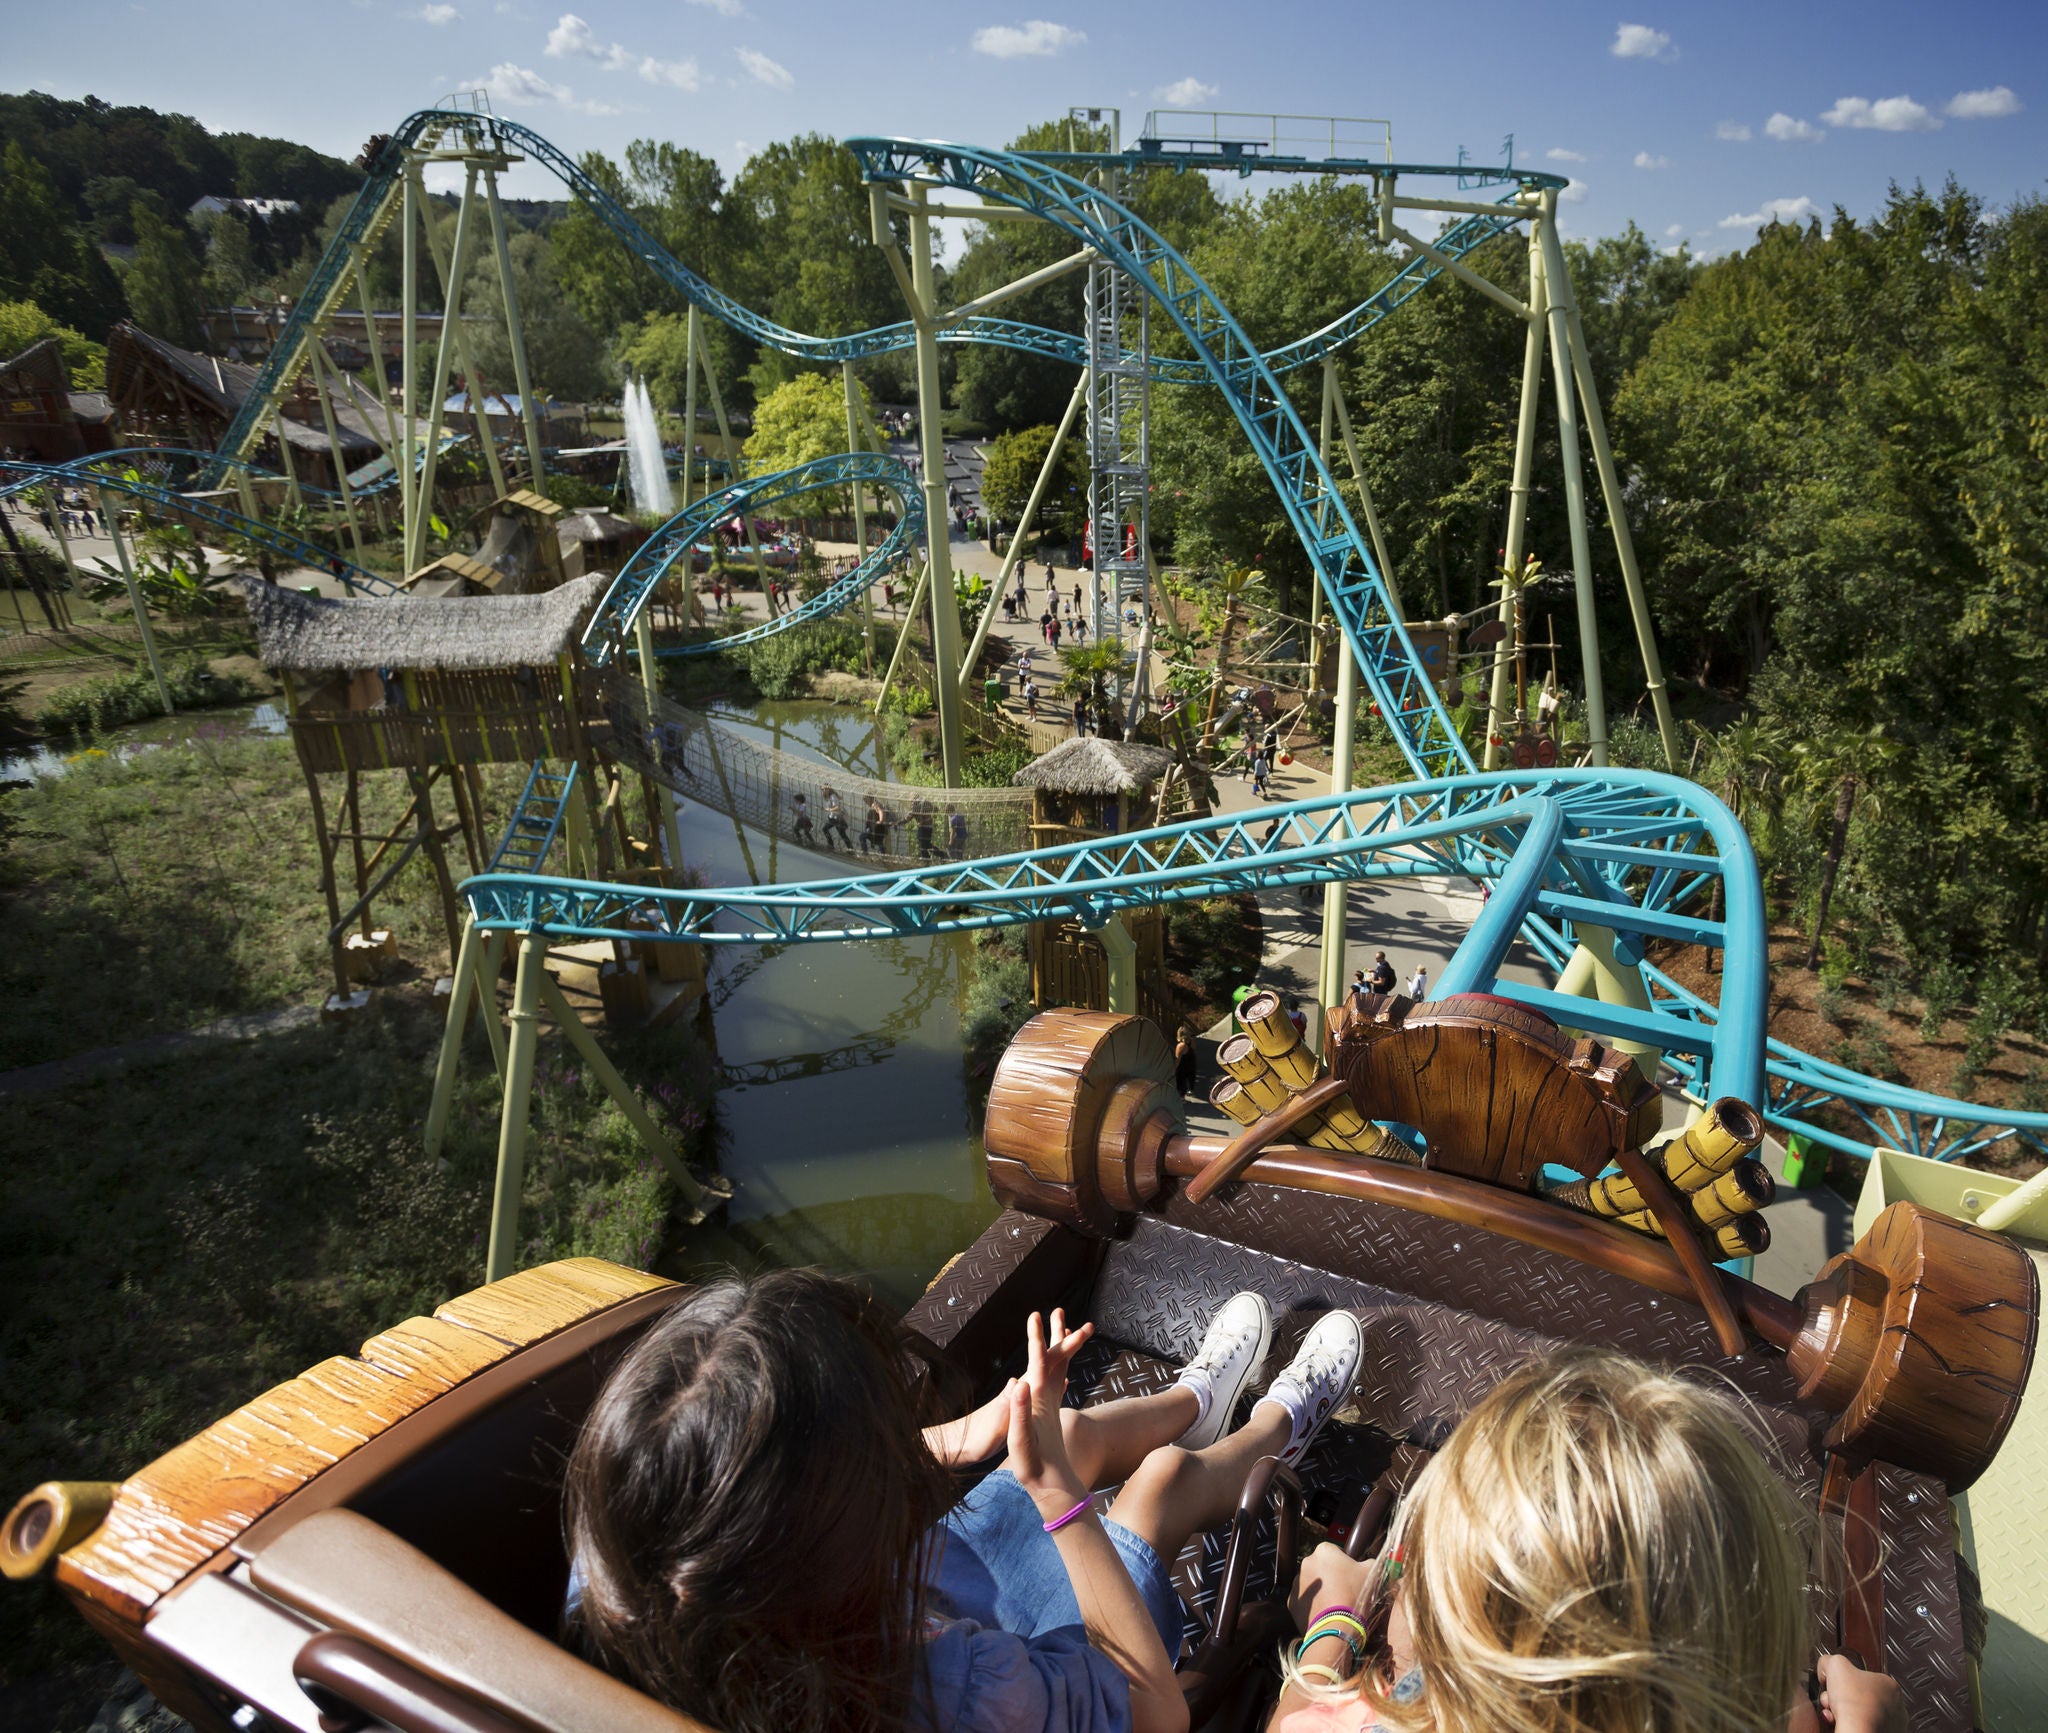 Have fun at Walibi Belgium with your family and/or your friends